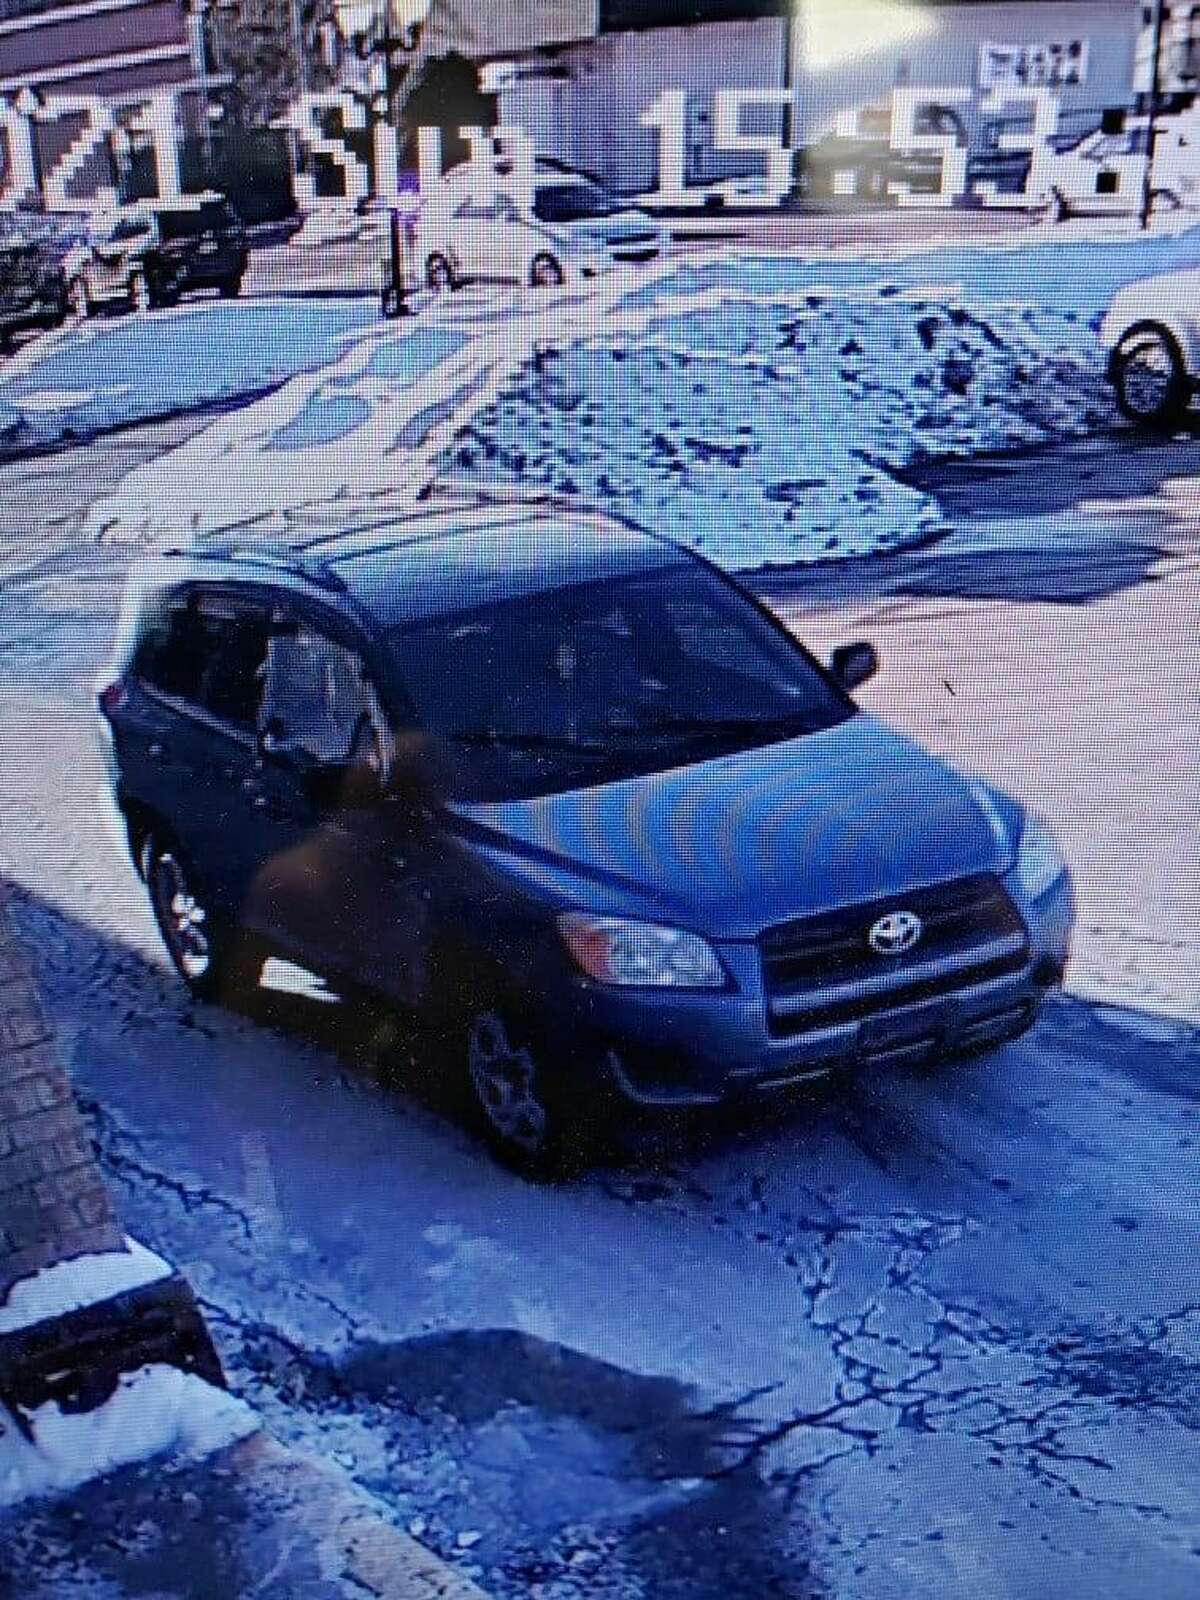 Police a this man stole 30 to 35 bags of shrimp from a Plymouth, Conn., store on Feb. 21, 2021, and fled the parking plaza in this vehicle.